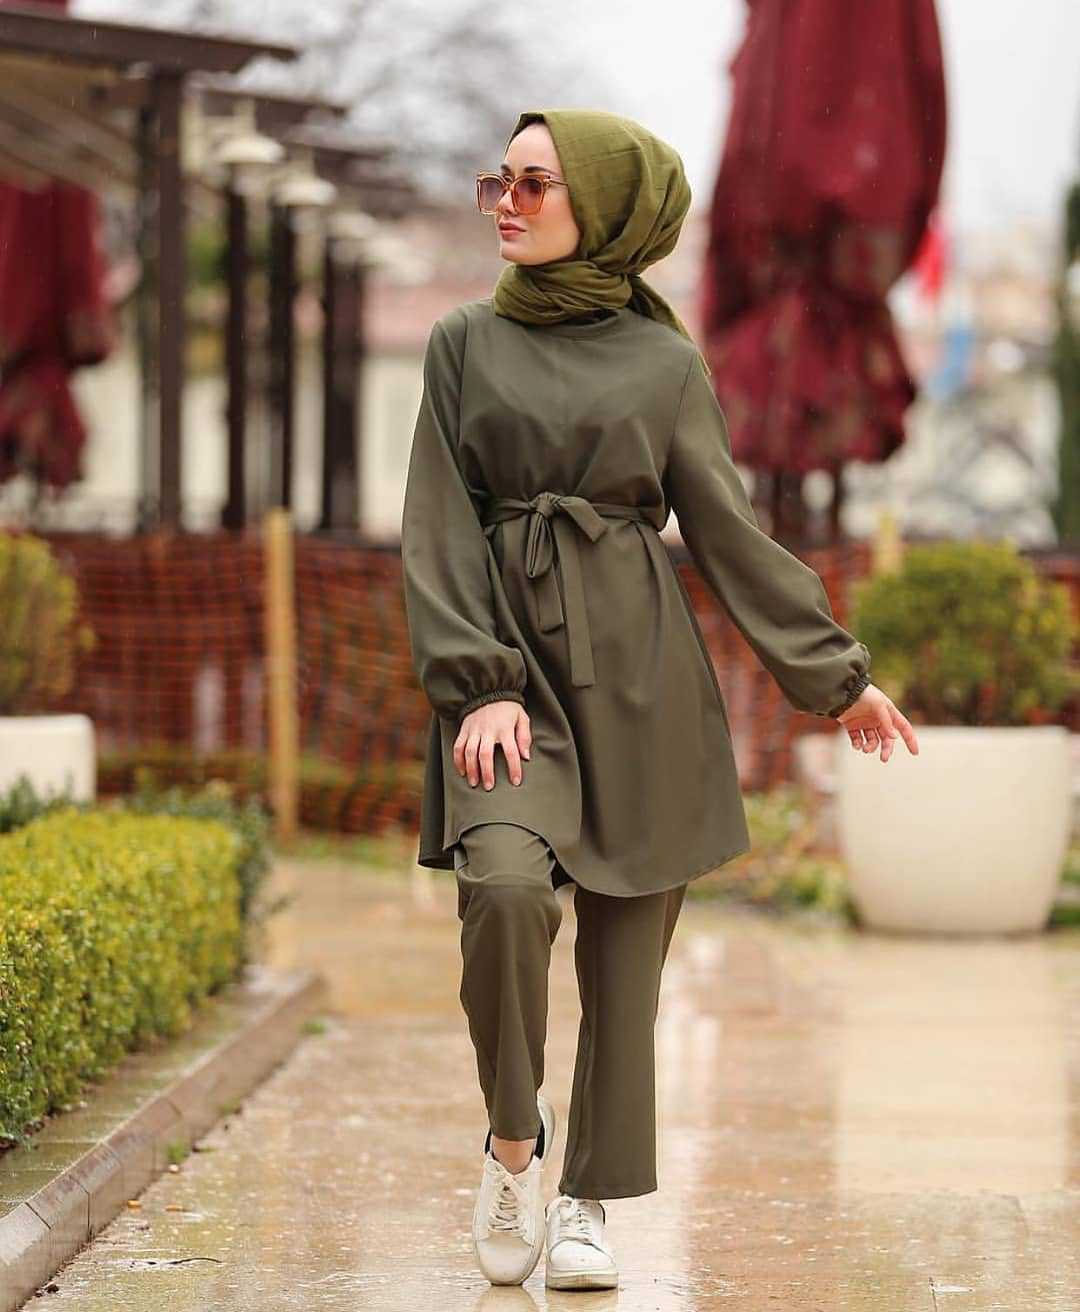 Arab Women's or Girl Muslim plus size two-piece suit